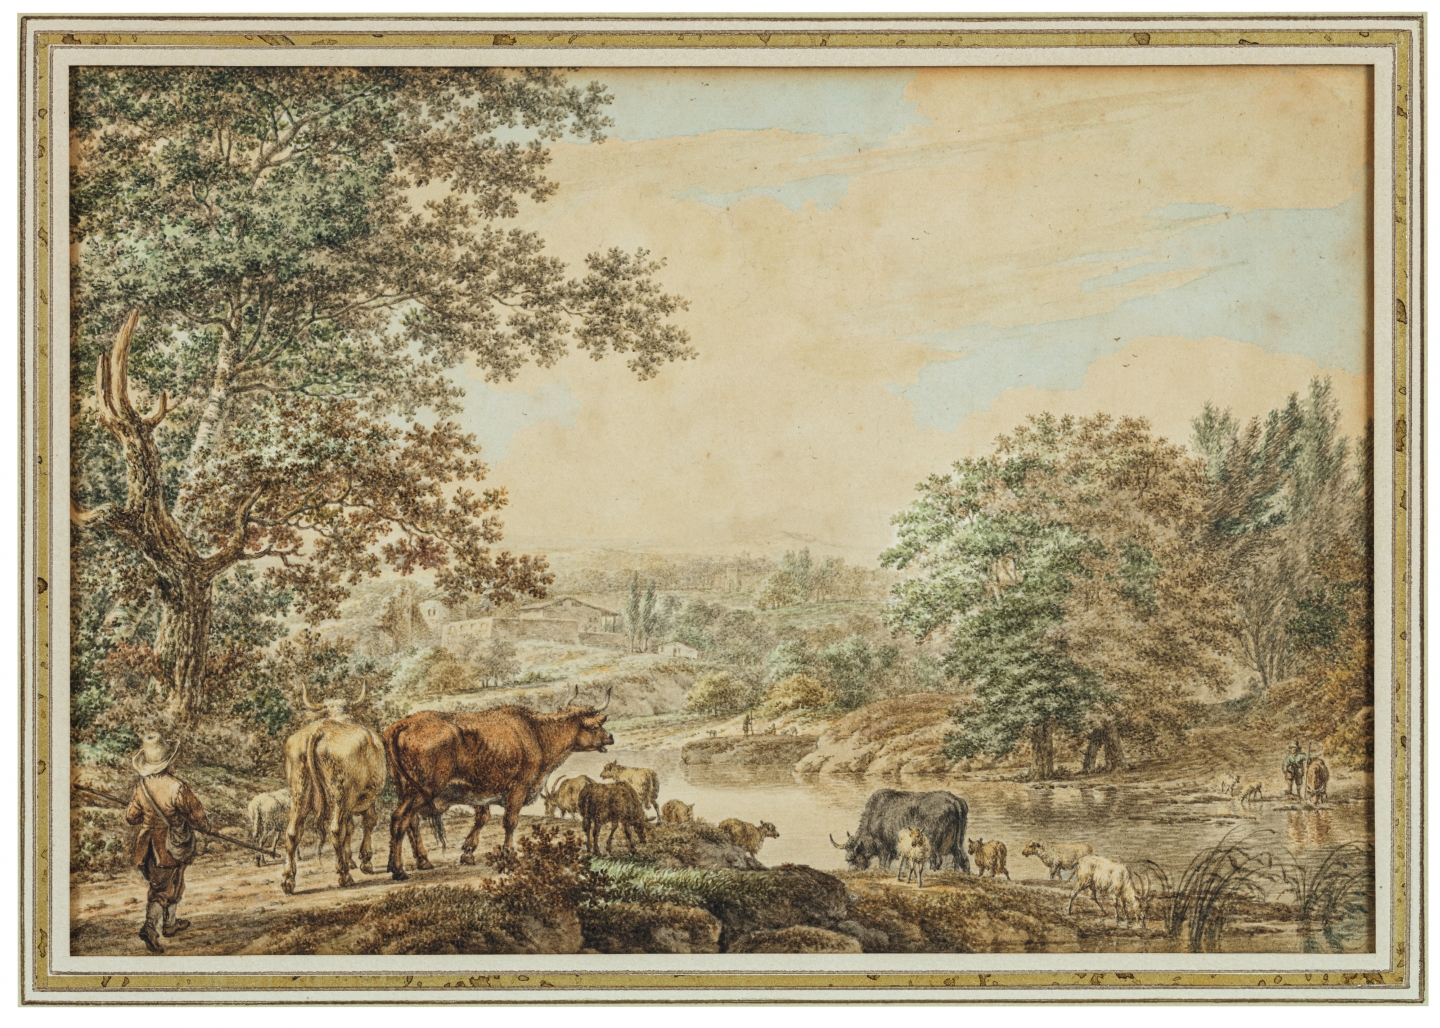 Jacob Cats (Altona 1741-1799 Amsterdam) Two shepherds with cattle